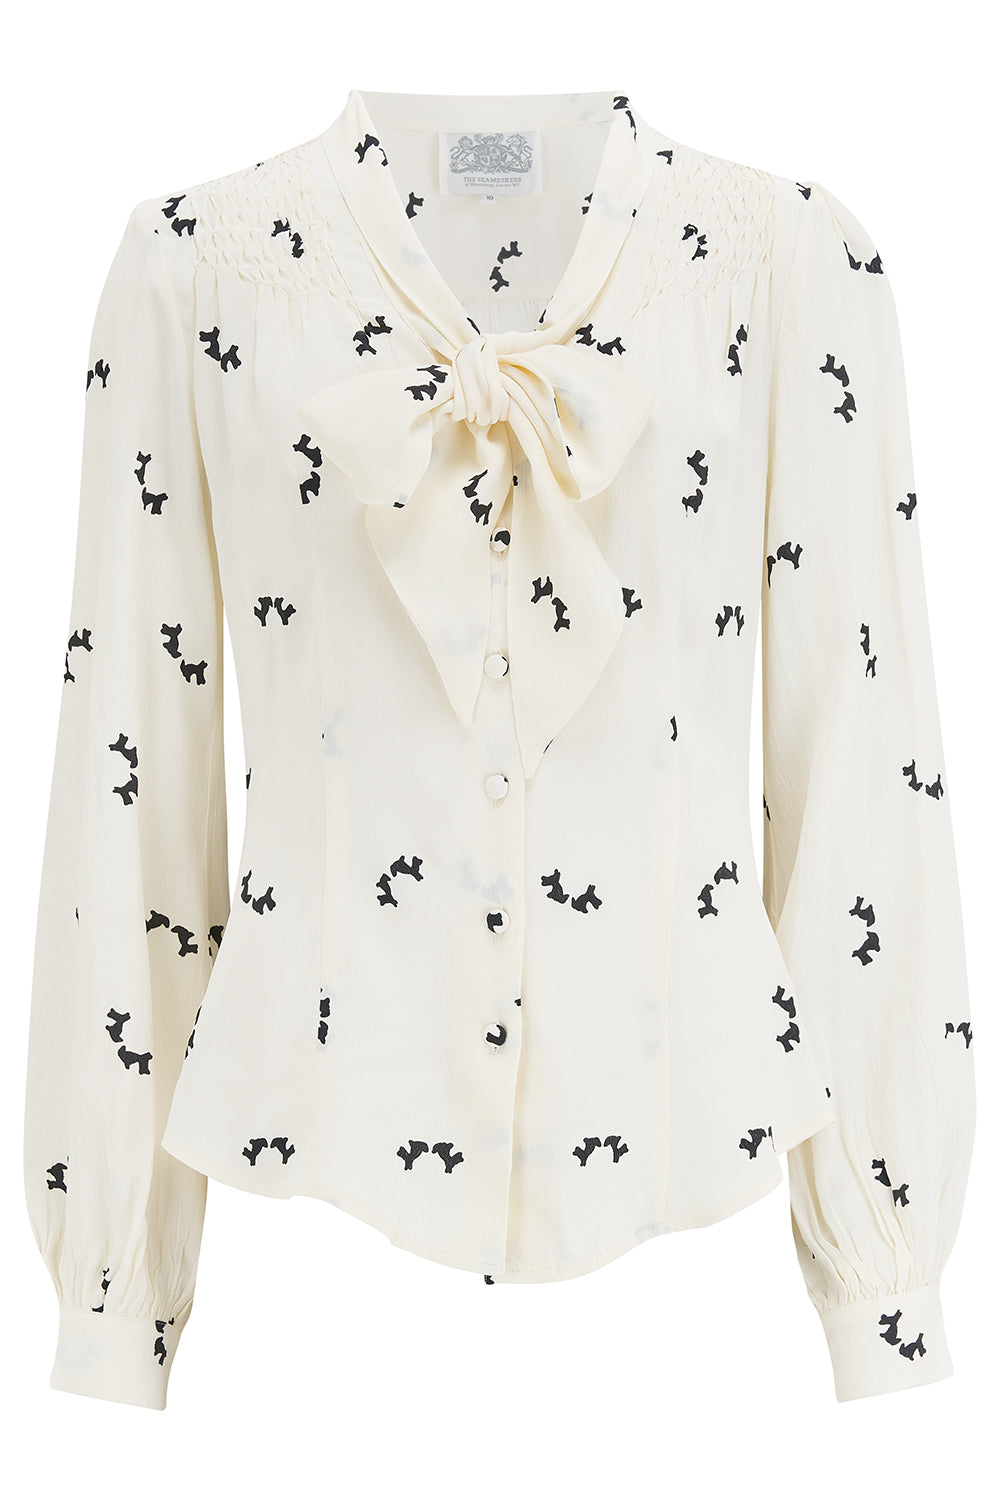 The "Eva" Long Sleeve Blouse in Cream Doggy Print  Authentic & Classic 1940s Vintage Style